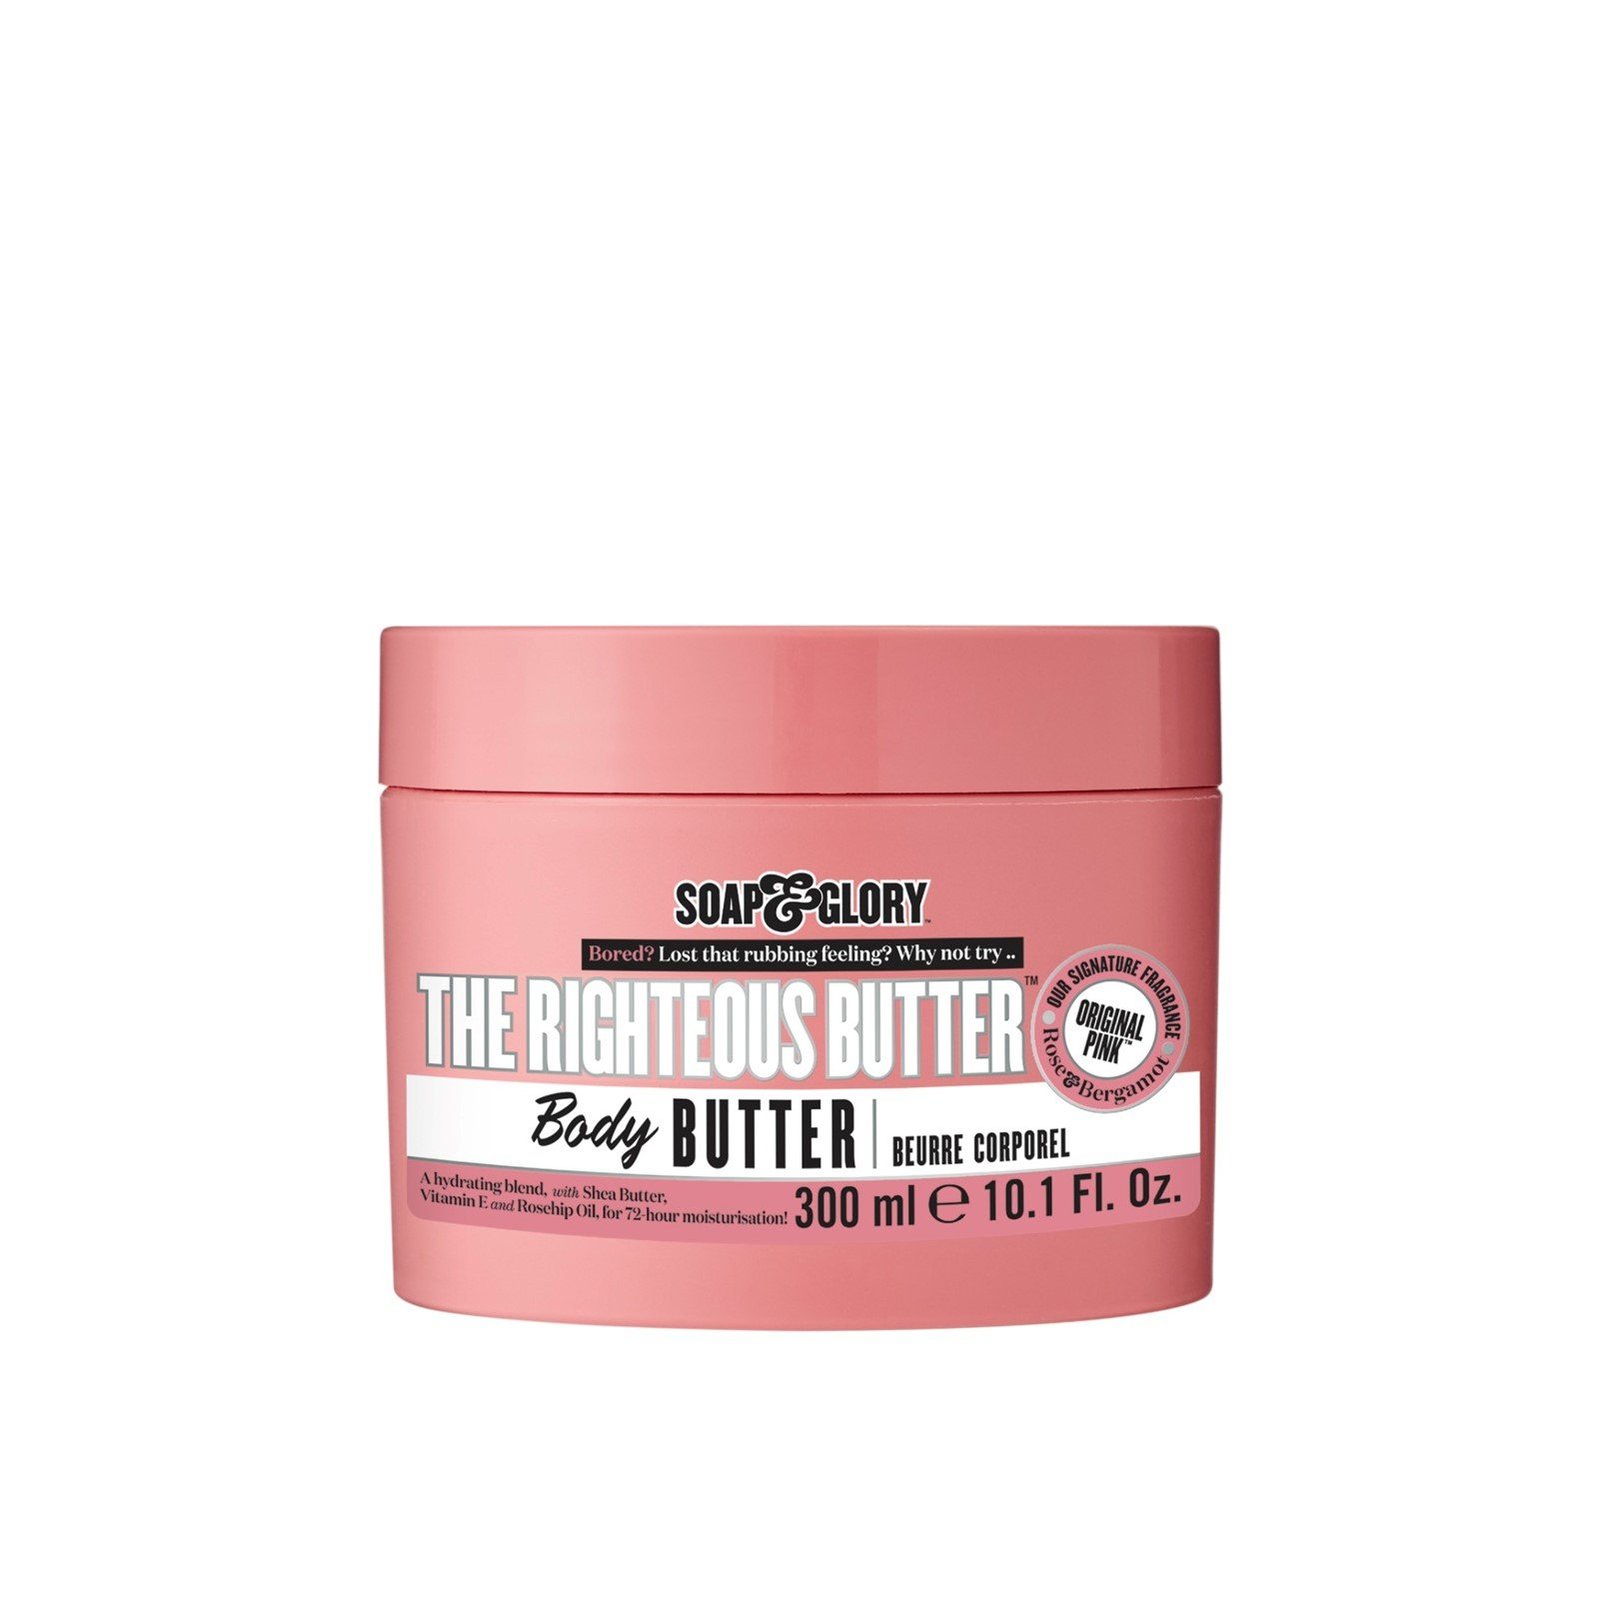 Soap & Glory The Righteous Butter Body Butter 300ml (10.1 fl oz)